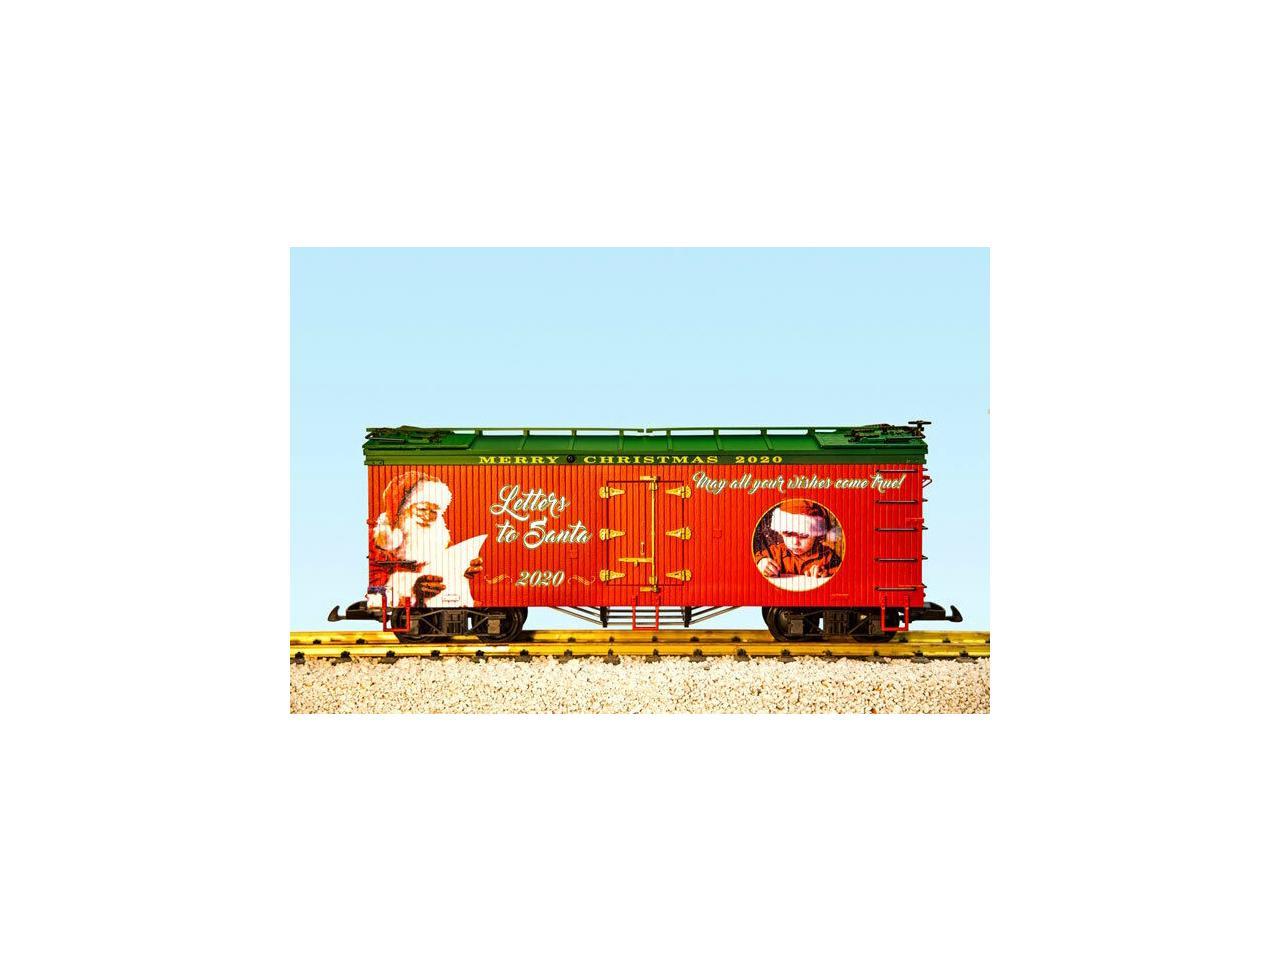 USA Trains R13037 CHRISTMAS 2019 LIMITED RUN REEFER JUST RELEASED NEW 2019 